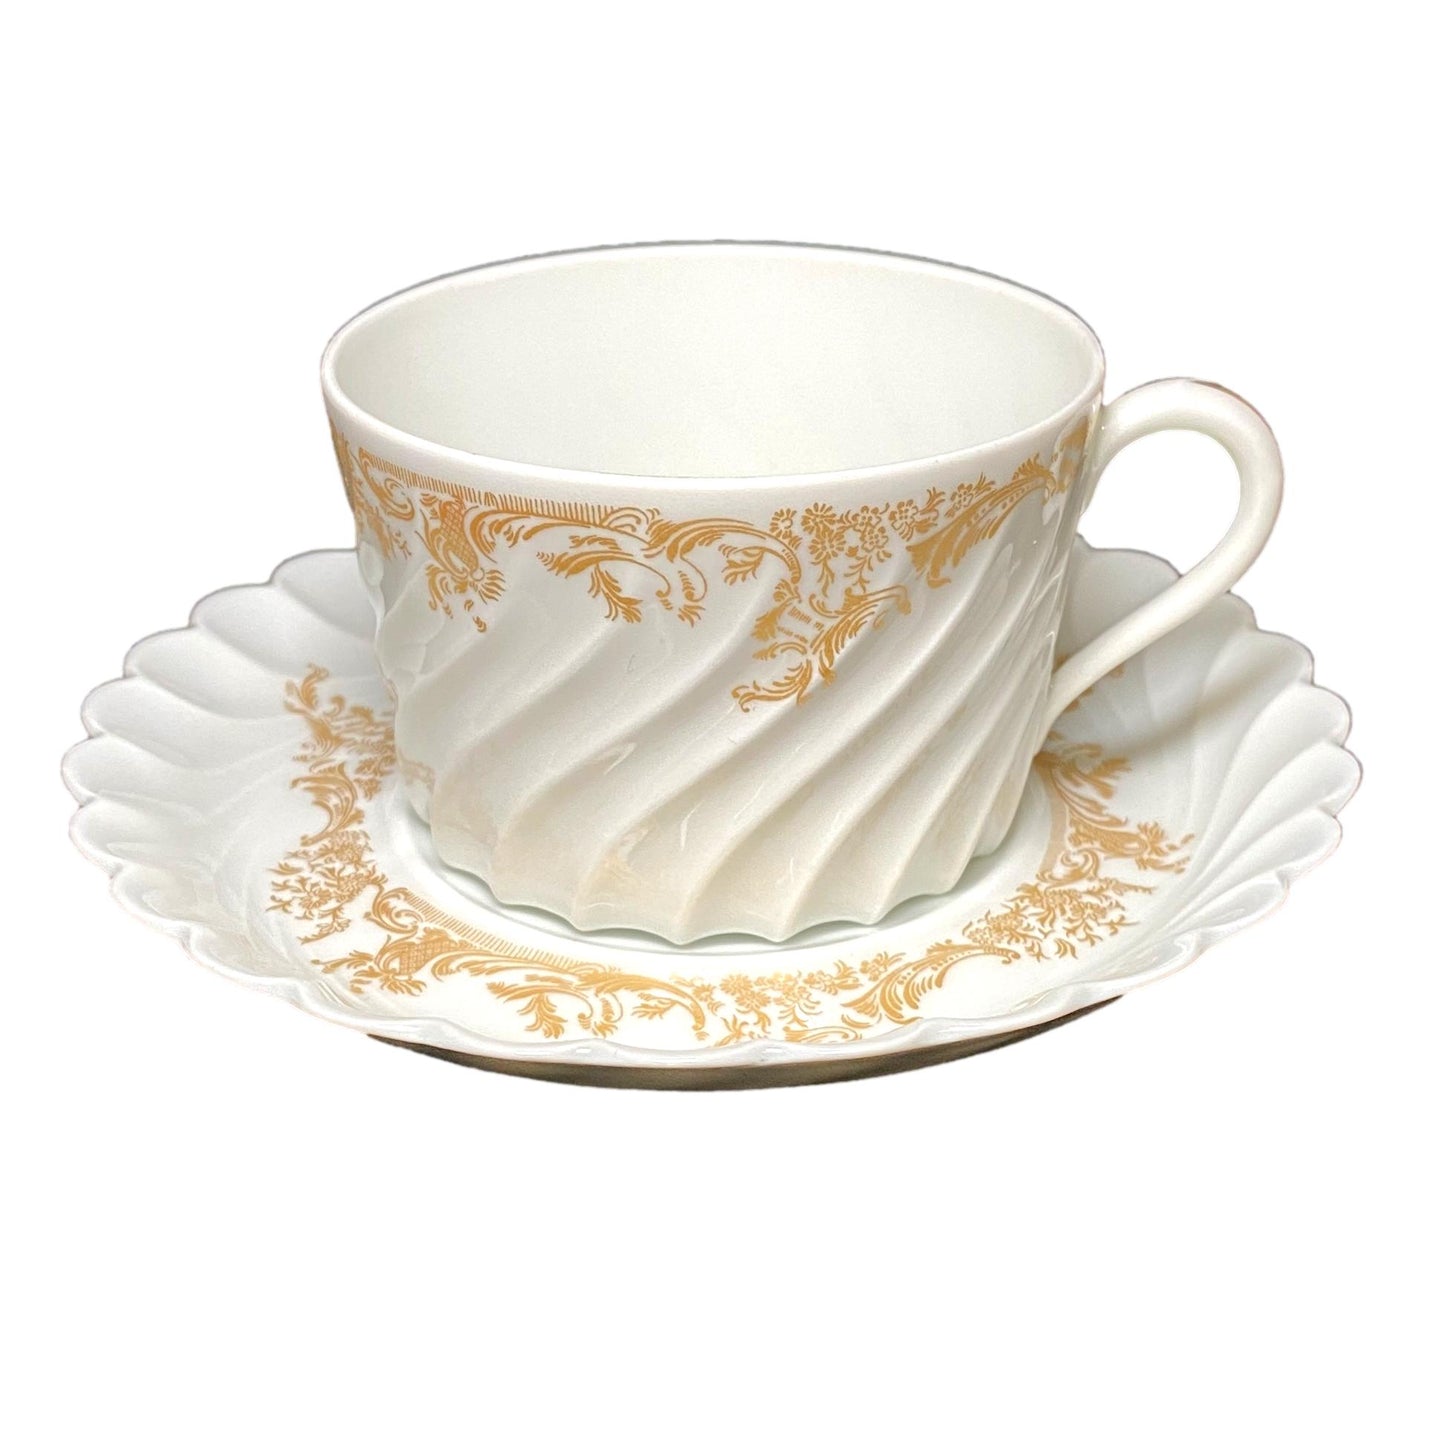 Haviland Limoges Ladore 13 Cups and Saucers